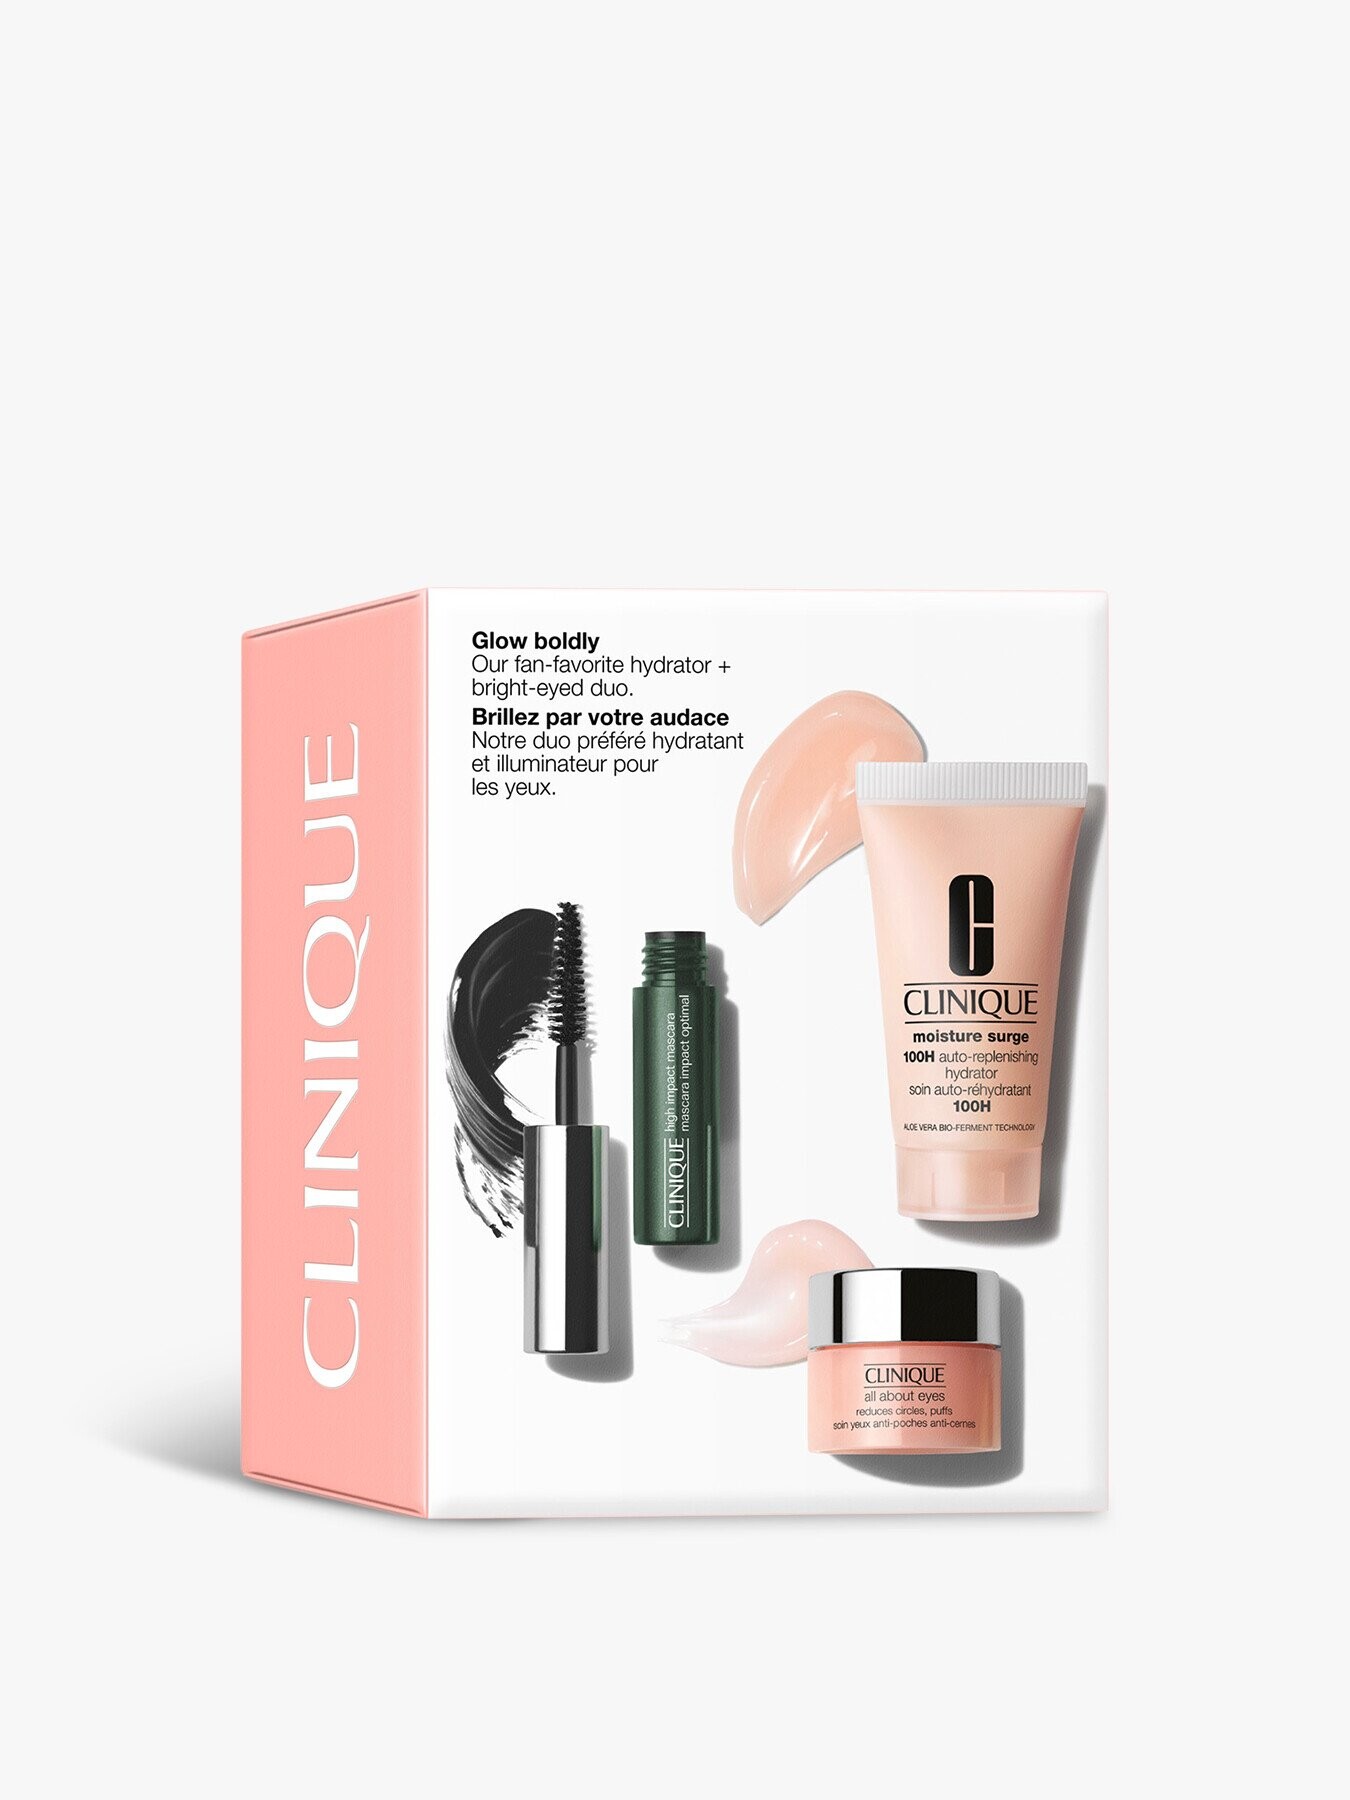 Clinique Glow and go bold Set